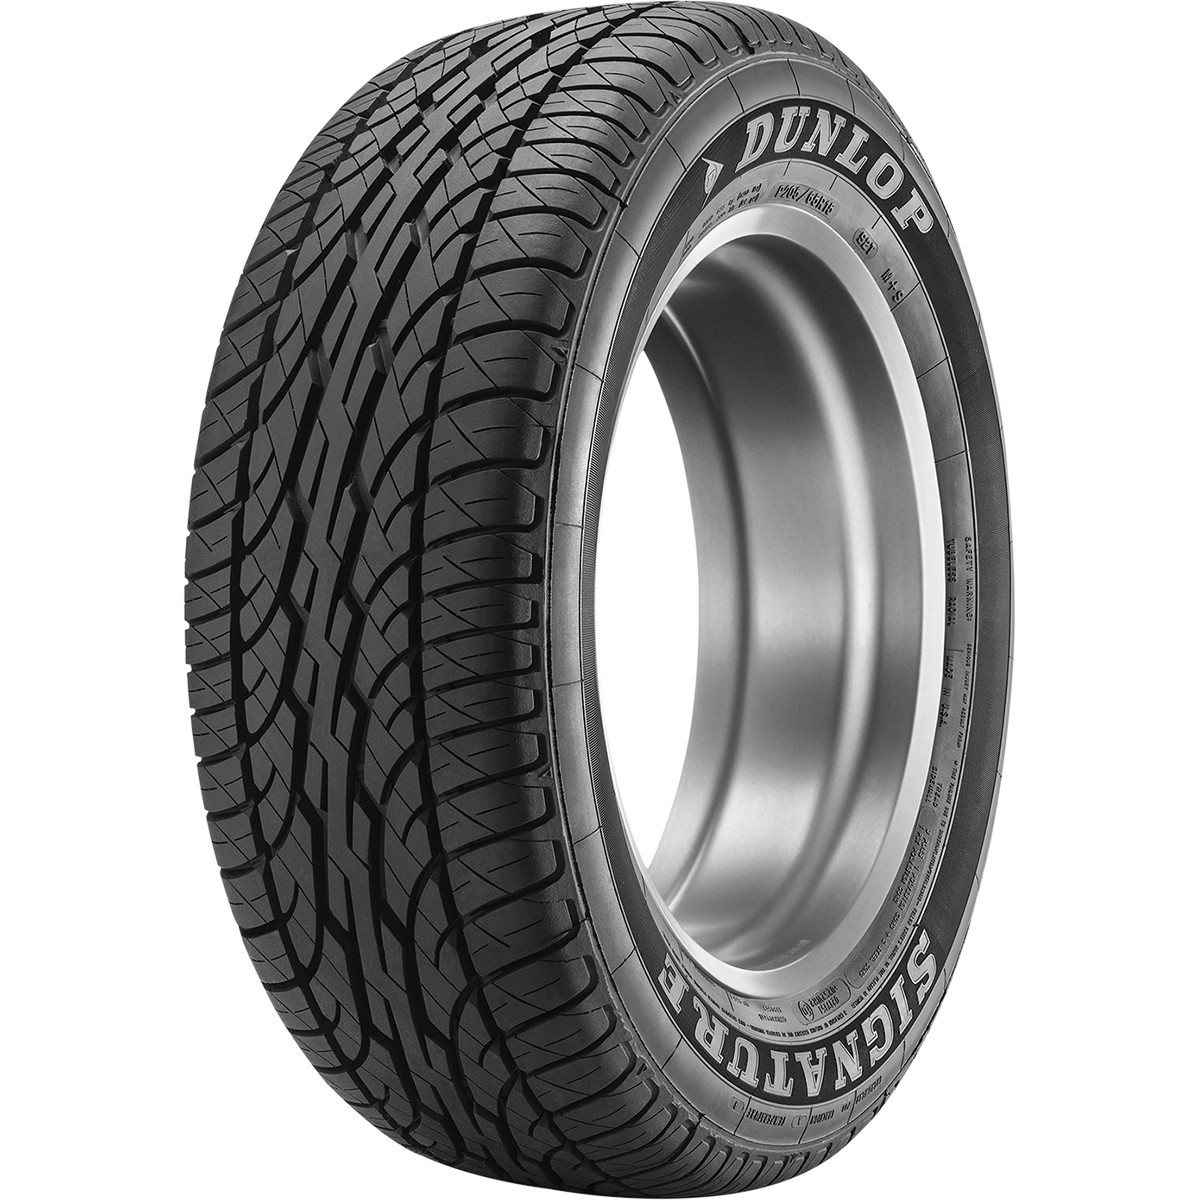 dunlop-motorcycle-tire-45105301-dunlop-geomax-mx52-tires-summit-racing